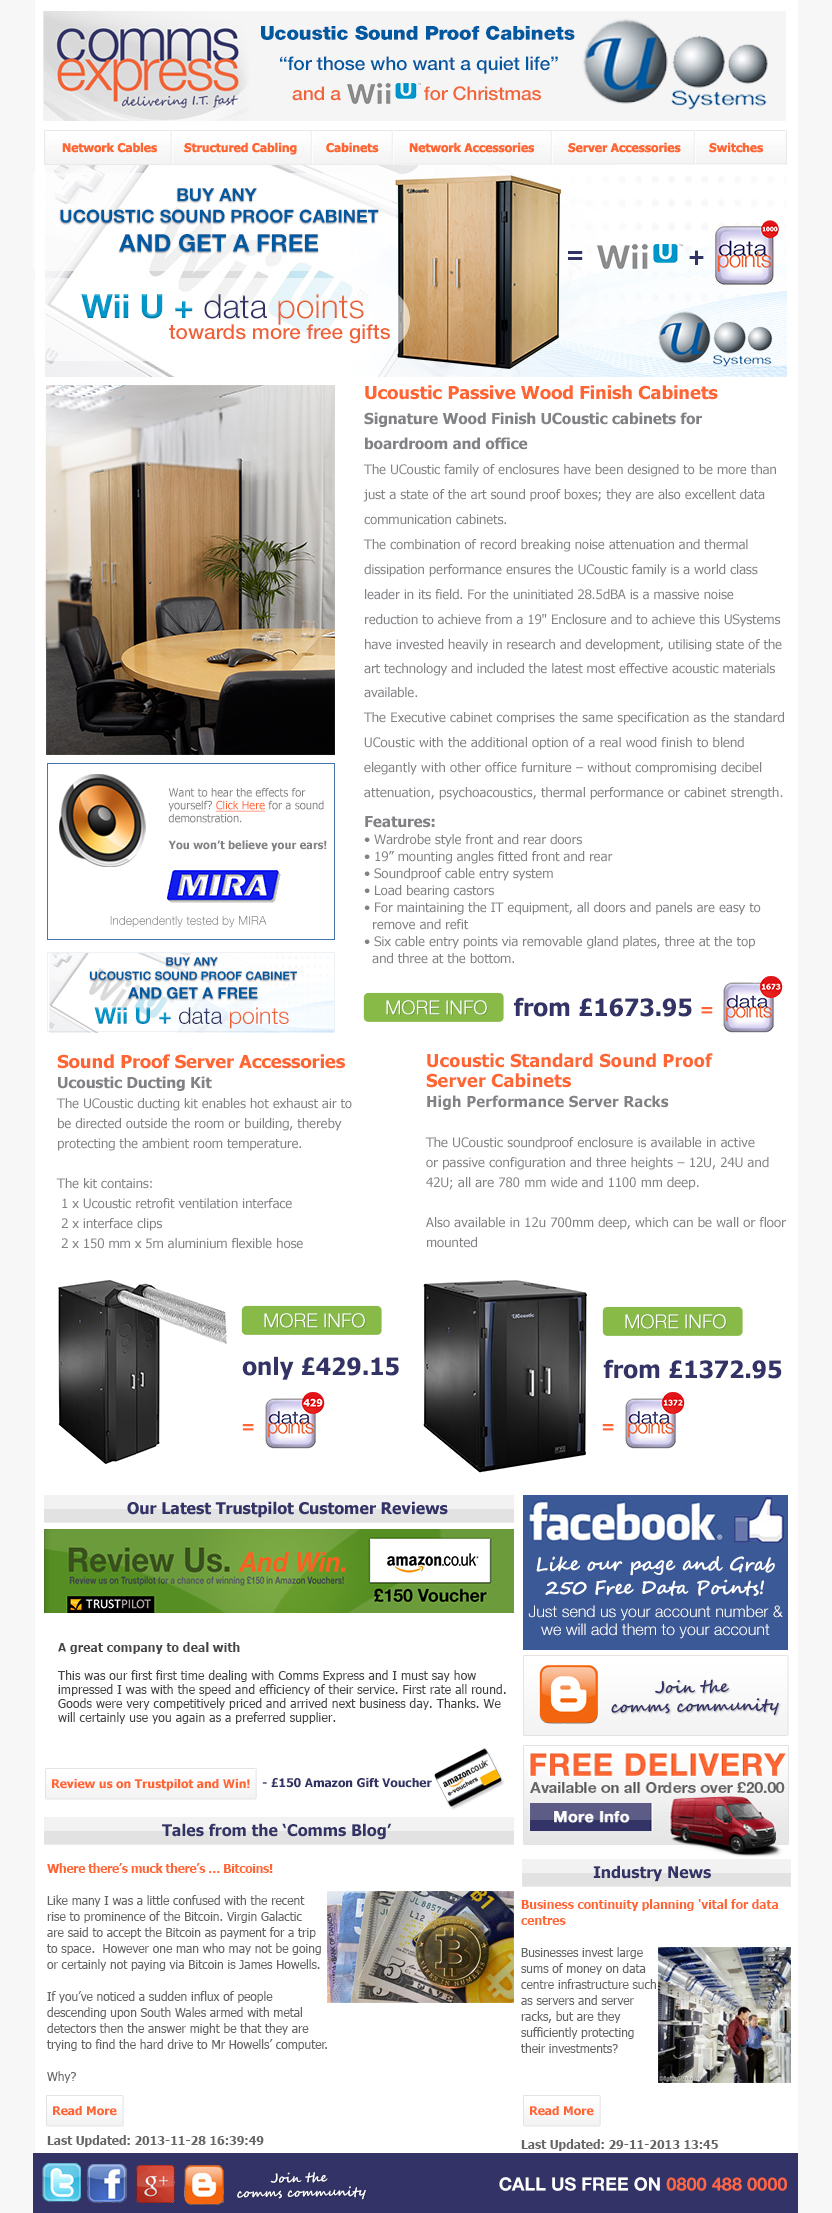 Buy any Ucoustic Sound Proof Cabinet and get a FREE Nin